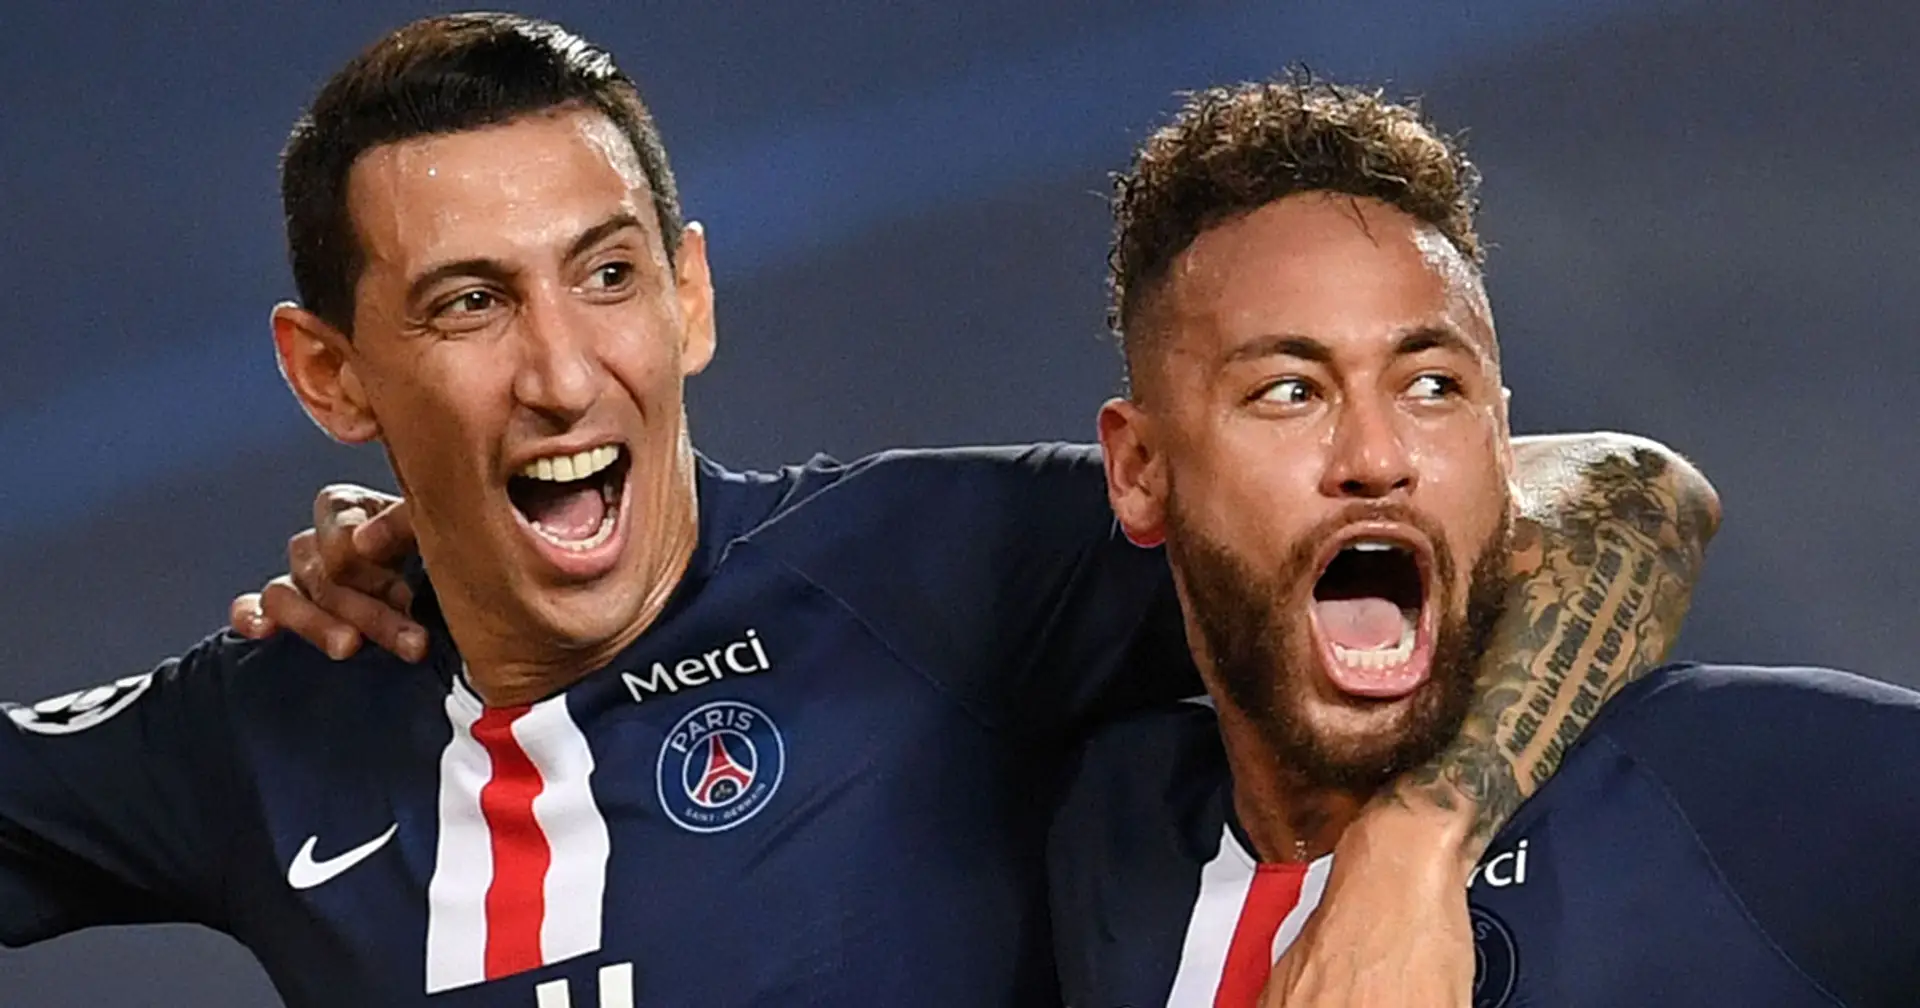 Both Neymar and Di Maria reportedly expected to make PSG squad for Barca clash